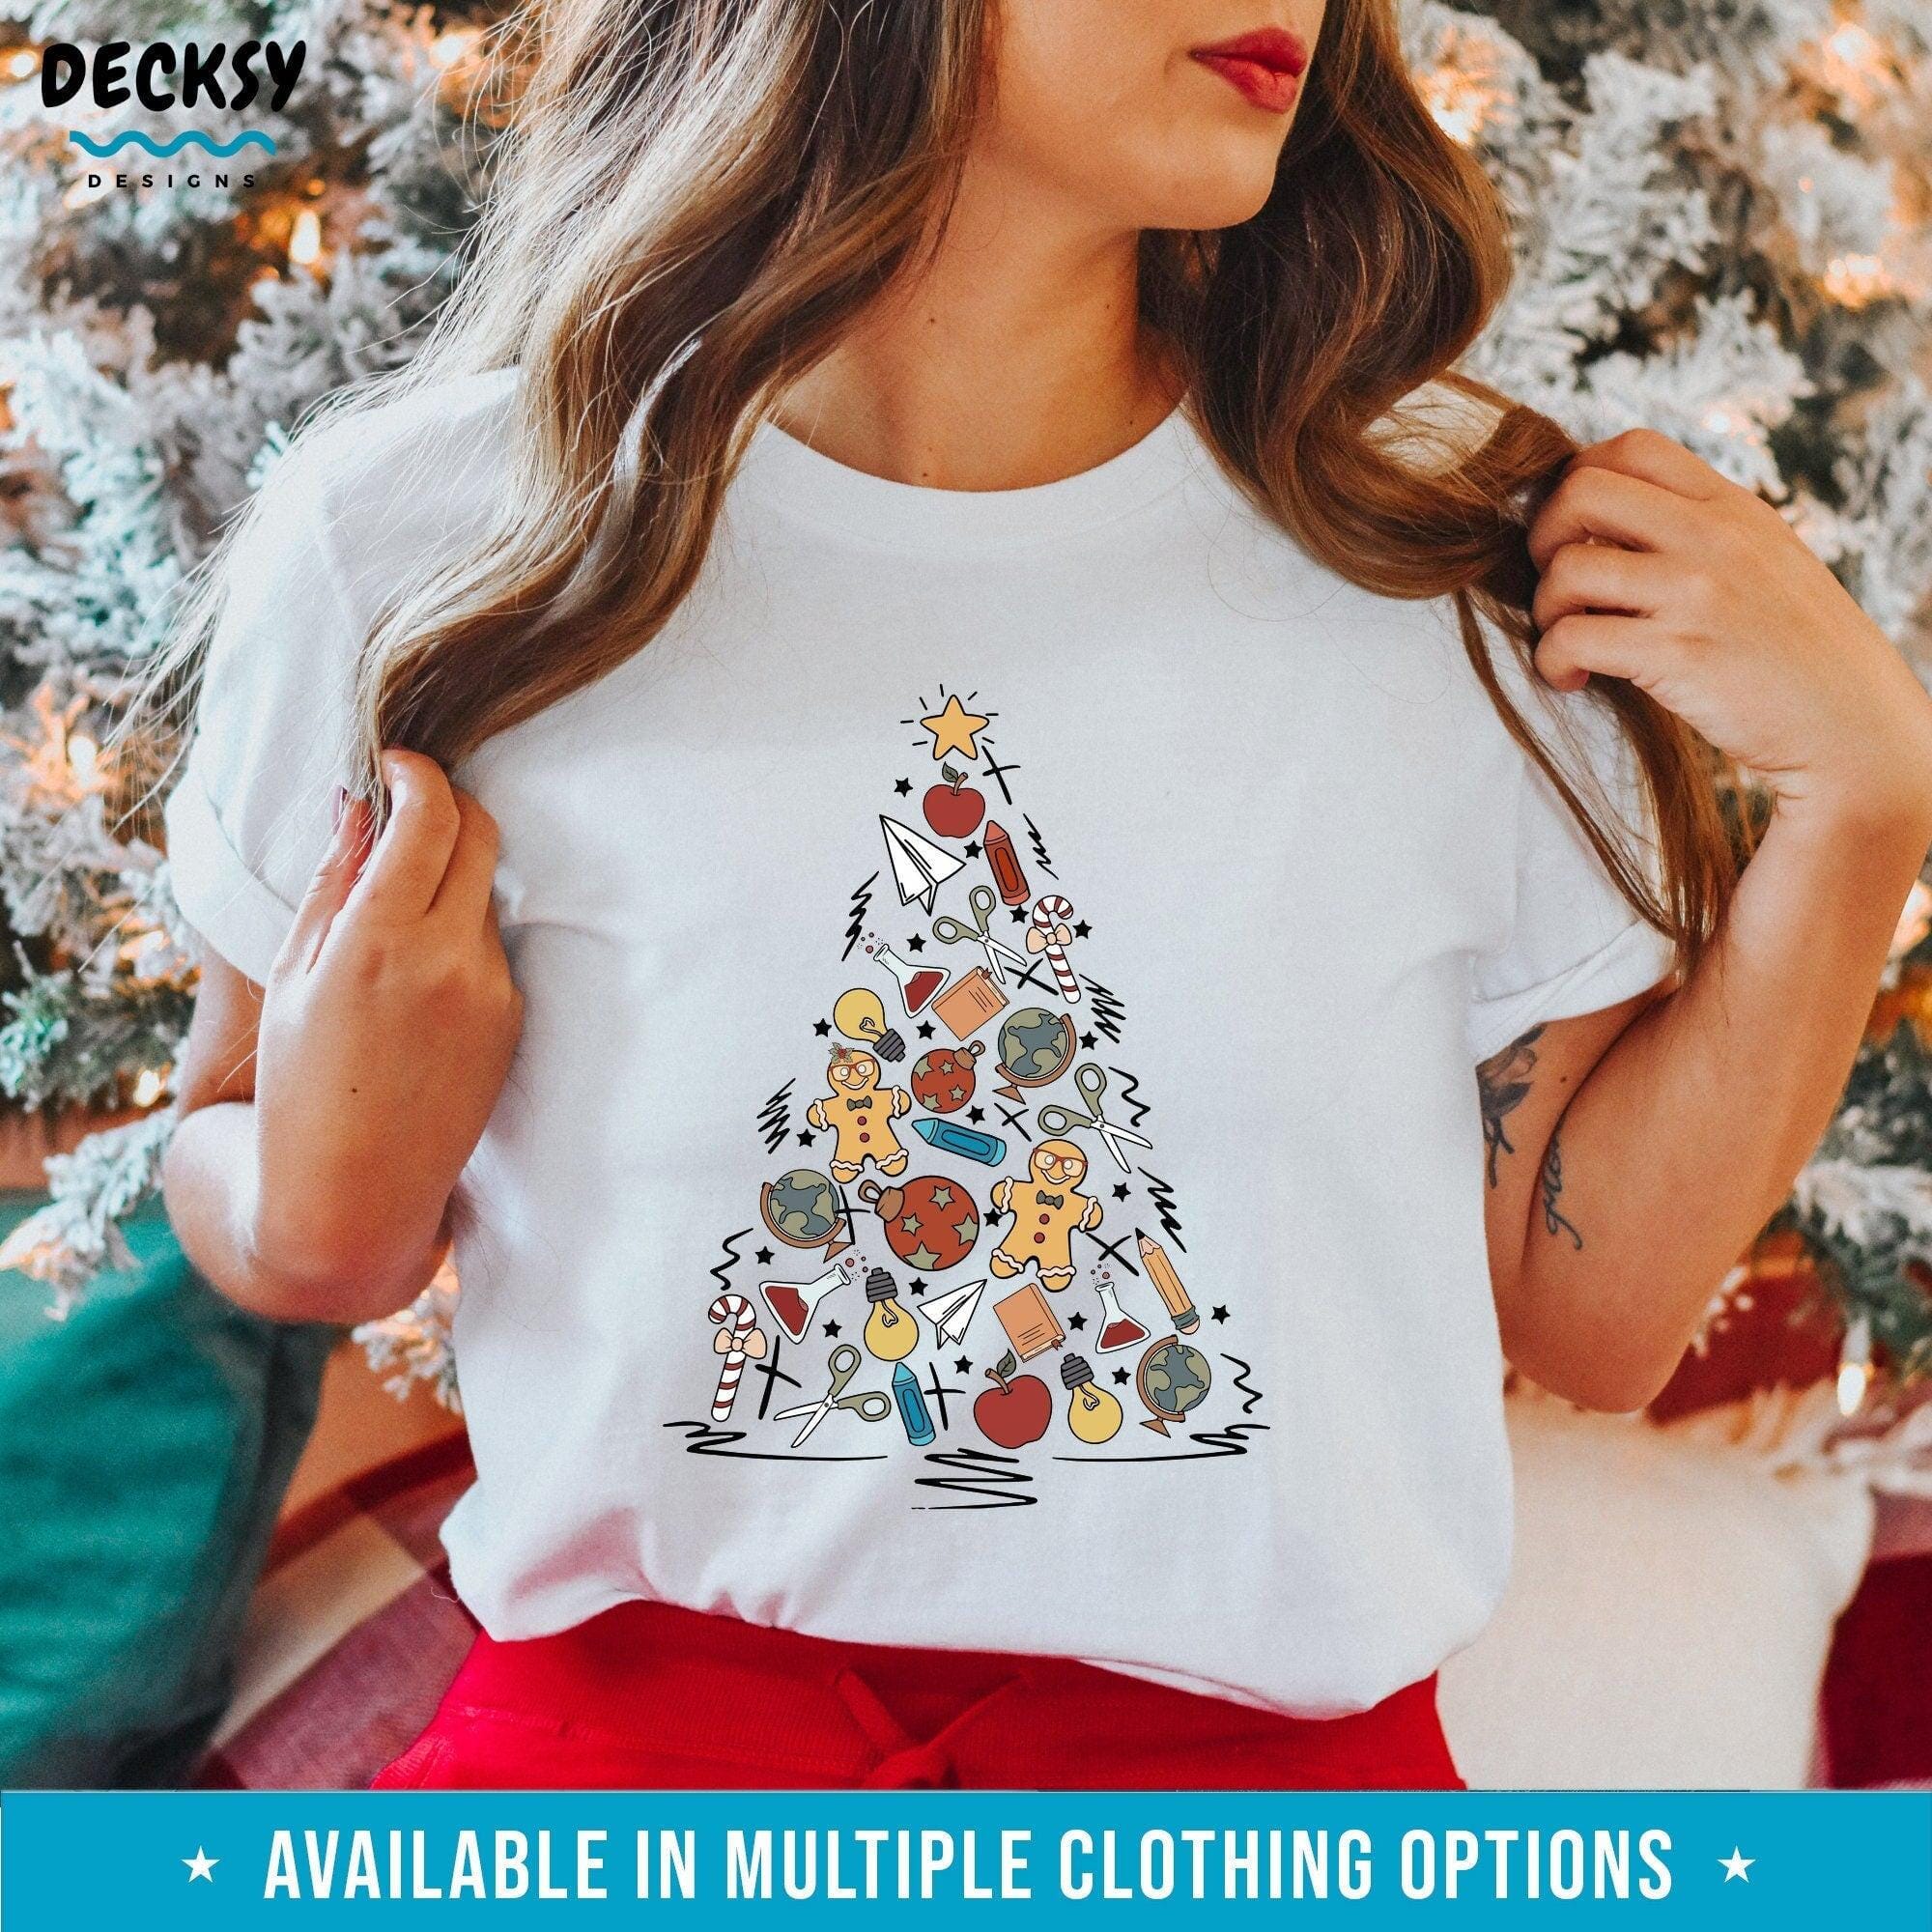 Teacher Christmas Tree Shirt, Gift for School Teacher-Clothing:Gender-Neutral Adult Clothing:Tops & Tees:T-shirts:Graphic Tees-DecksyDesigns